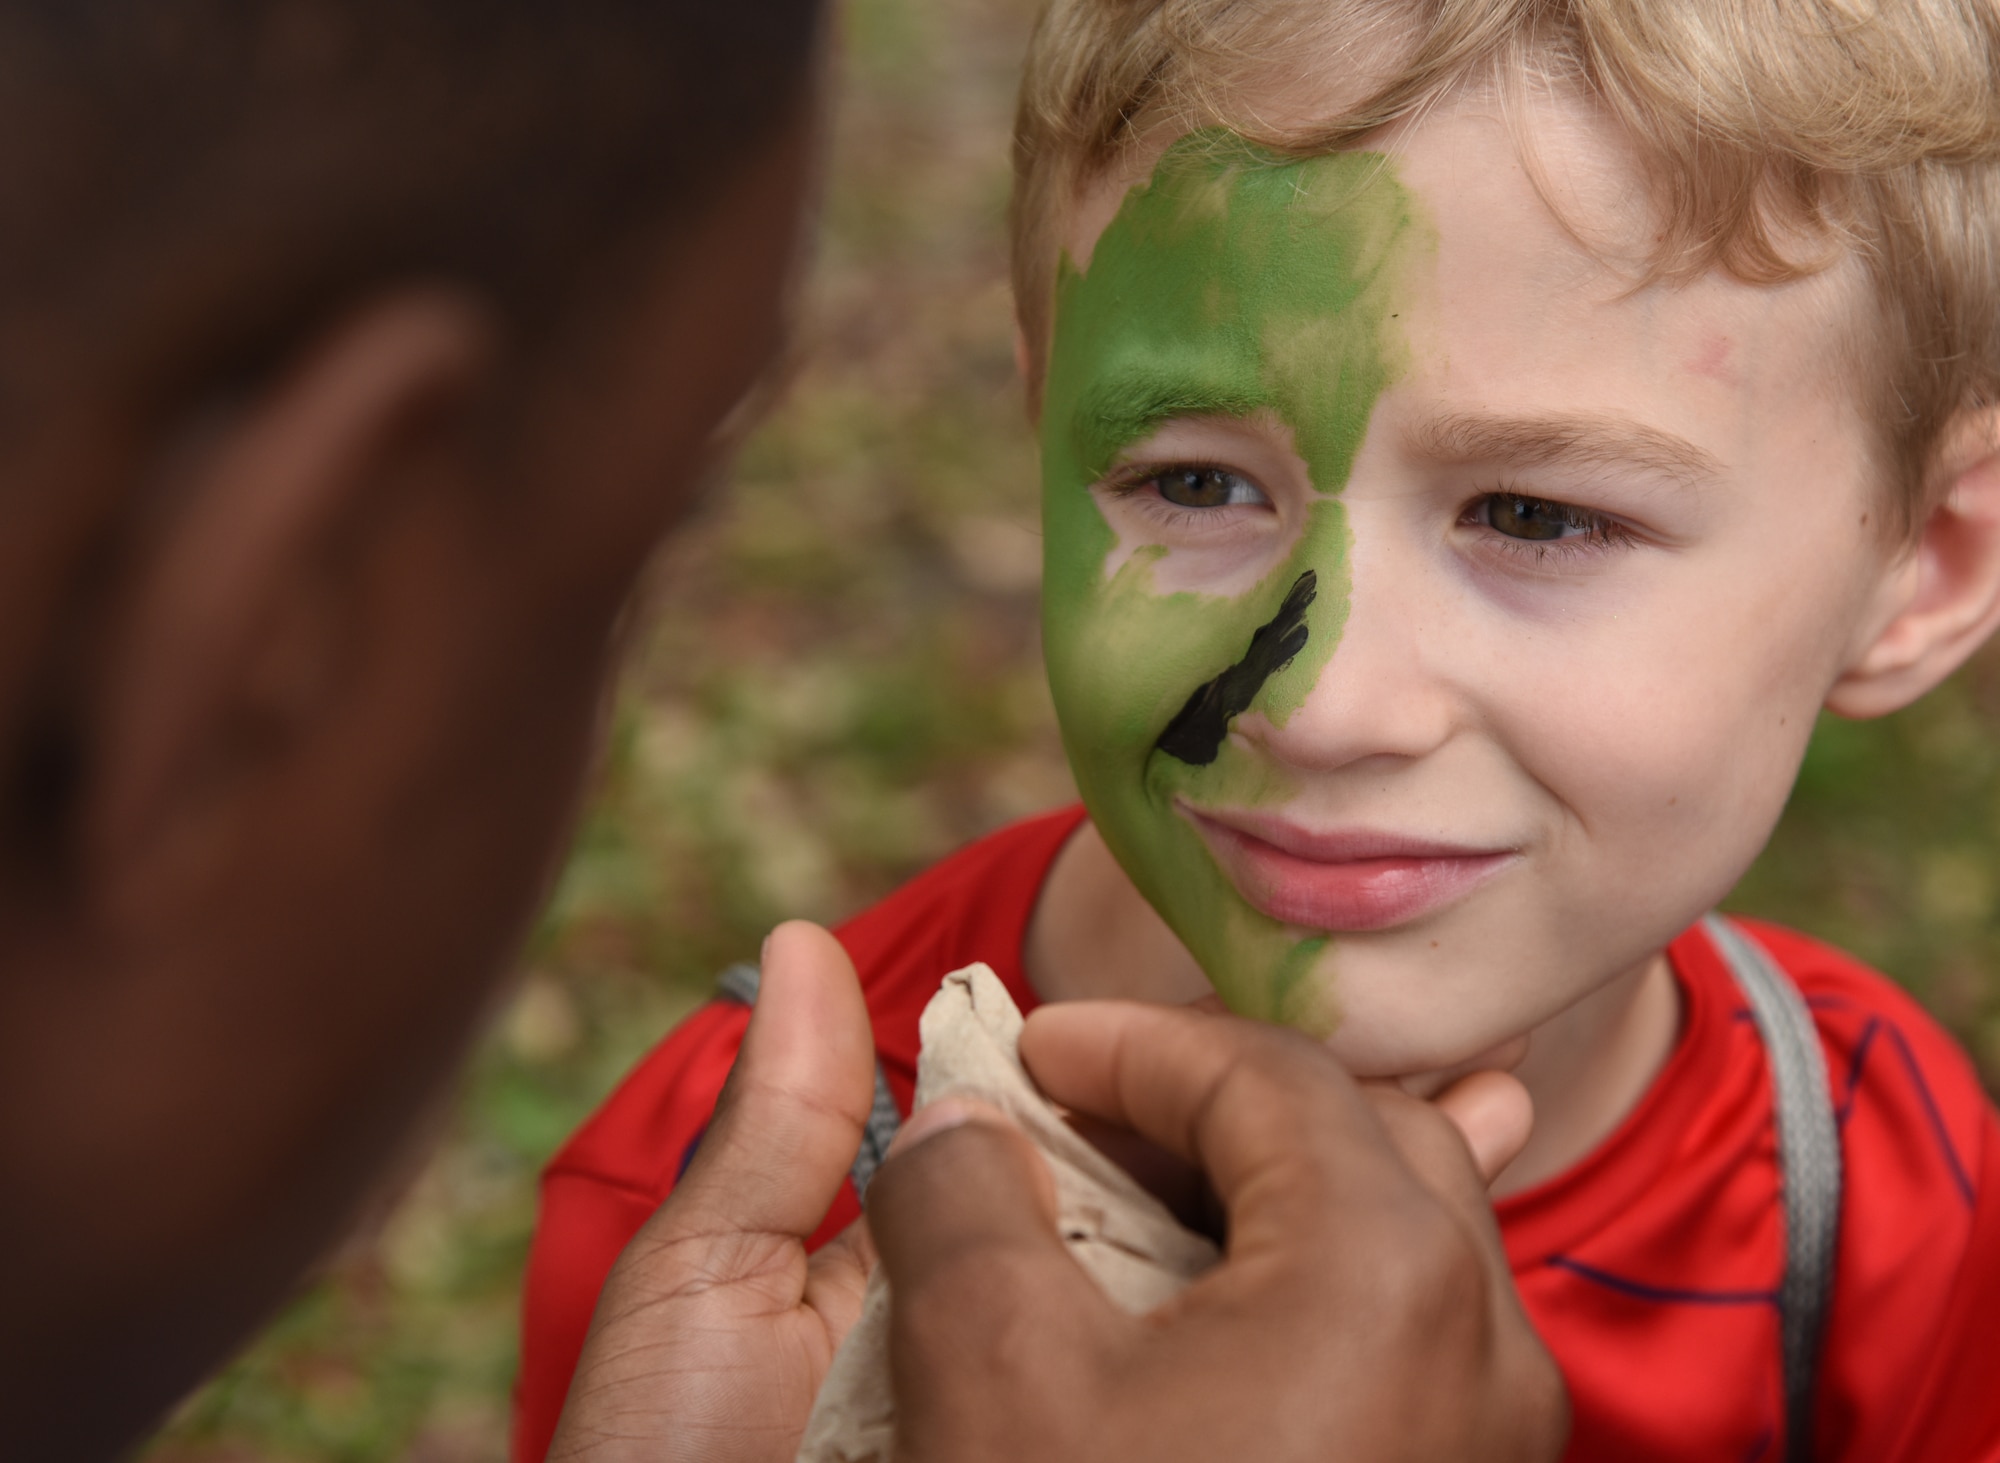 U.S. Air Force Airman Basic Lavelle Hagan, 335th Training Squadron student, applies "war paint" on Channing Harrigan, son of Tech. Sgt. Lindzi Rodrigue, 81st Diagnostic and Therapeutics Squadron unit program coordinator, during Operation Hero at Keesler Air Force Base, Mississippi, April 6, 2019. The event, hosted by the Airman and Family Readiness Center in recognition of the Month of the Military Child, gave military children a glimpse into the lives of deployed military members. Children received Operation Hero dog tags and t-shirts as they made their way through the mock deployment line as well as the opportunity to experience medical triage demonstrations, gas mask training and have their faces painted. (U.S. Air Force photo by Kemberly Groue)